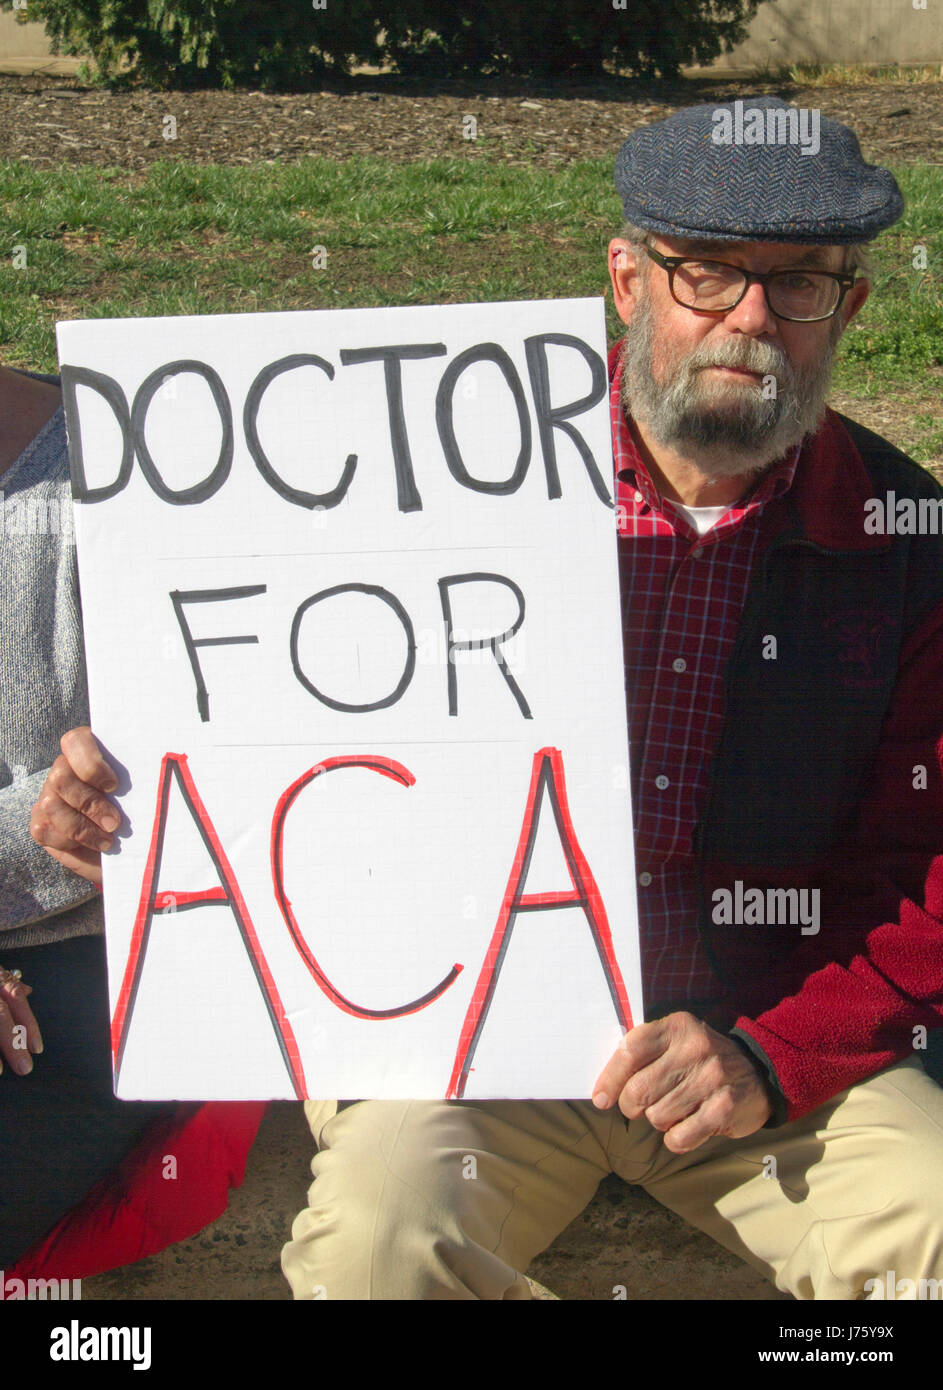 Asheville, North Carolina, USA - February 25, 2017:  An older man holds a sign at an Affordable Care Act rally that says ' DOCTOR FOR ACA' in oppositi Stock Photo